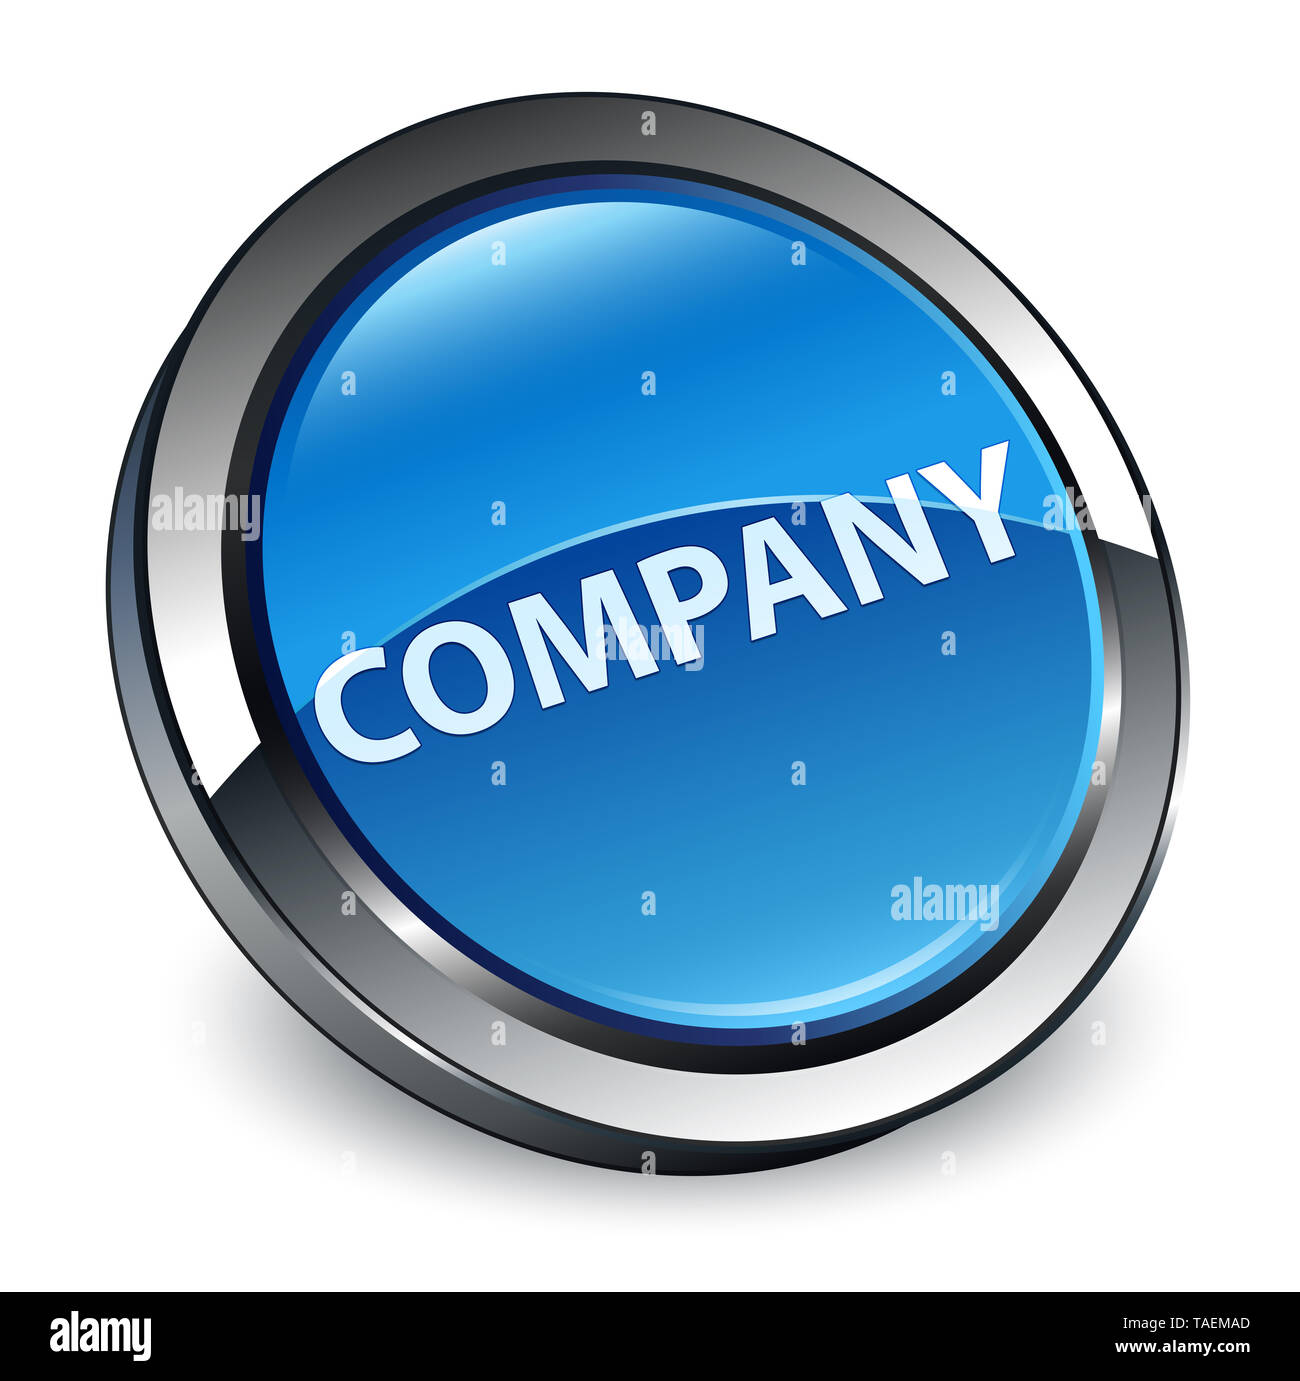 Company isolated on 3d blue round button abstract illustration Stock Photo